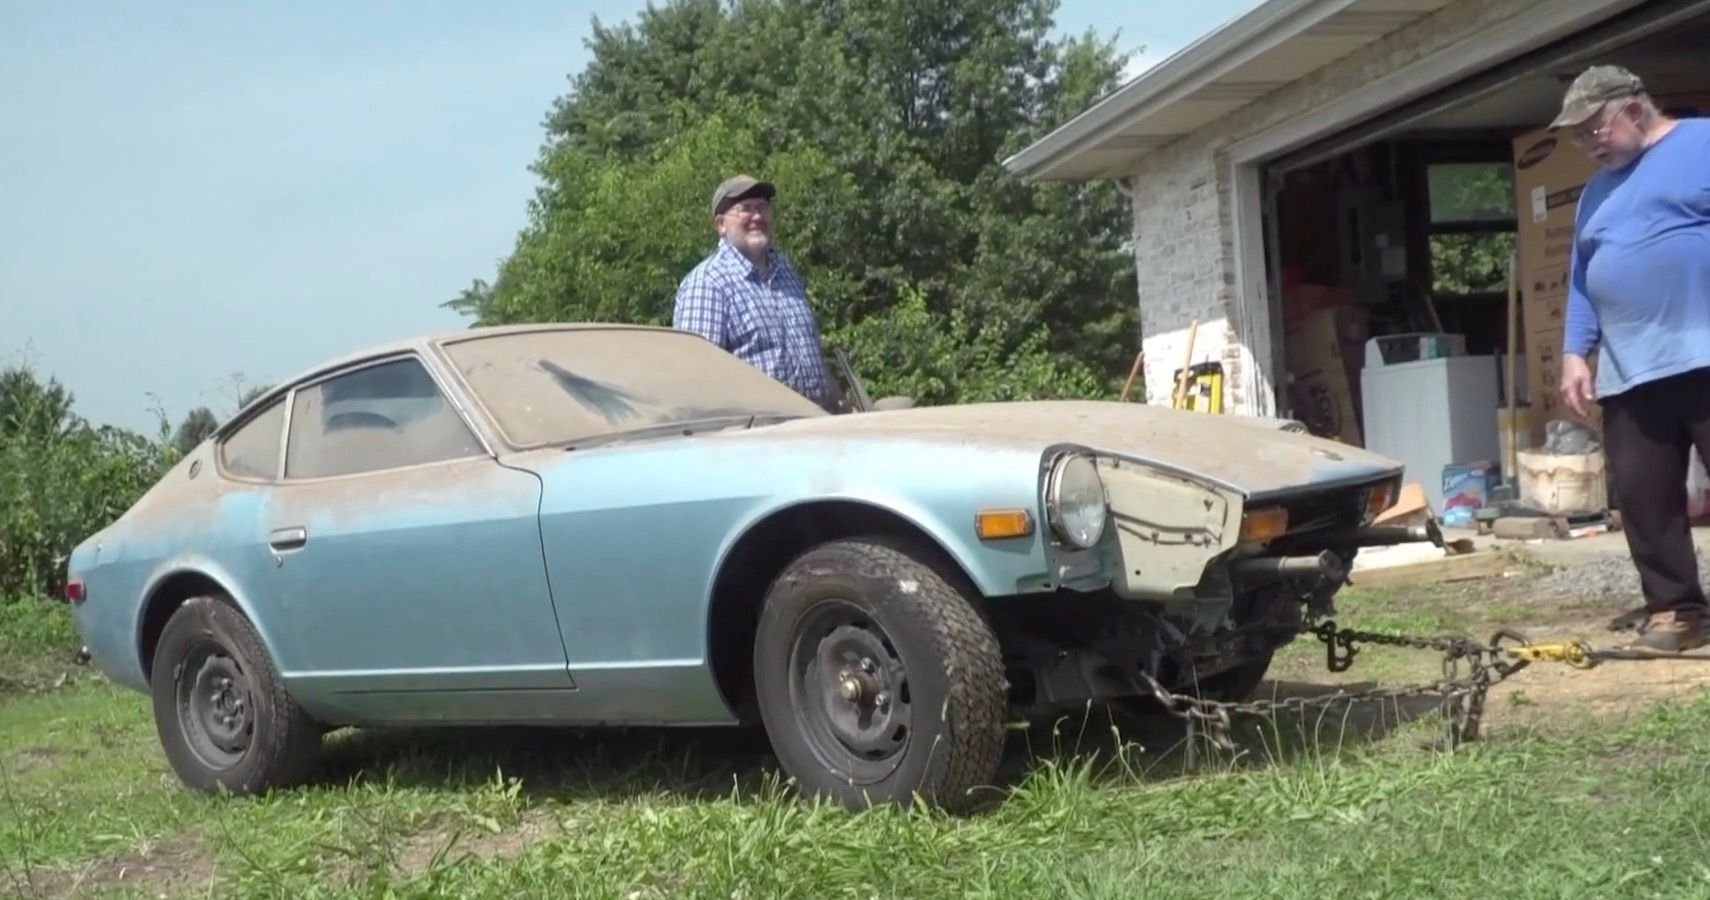 It's About Time This Rare Datsun 280z Barn Find Got Washed After 44 Years Collecting Dust